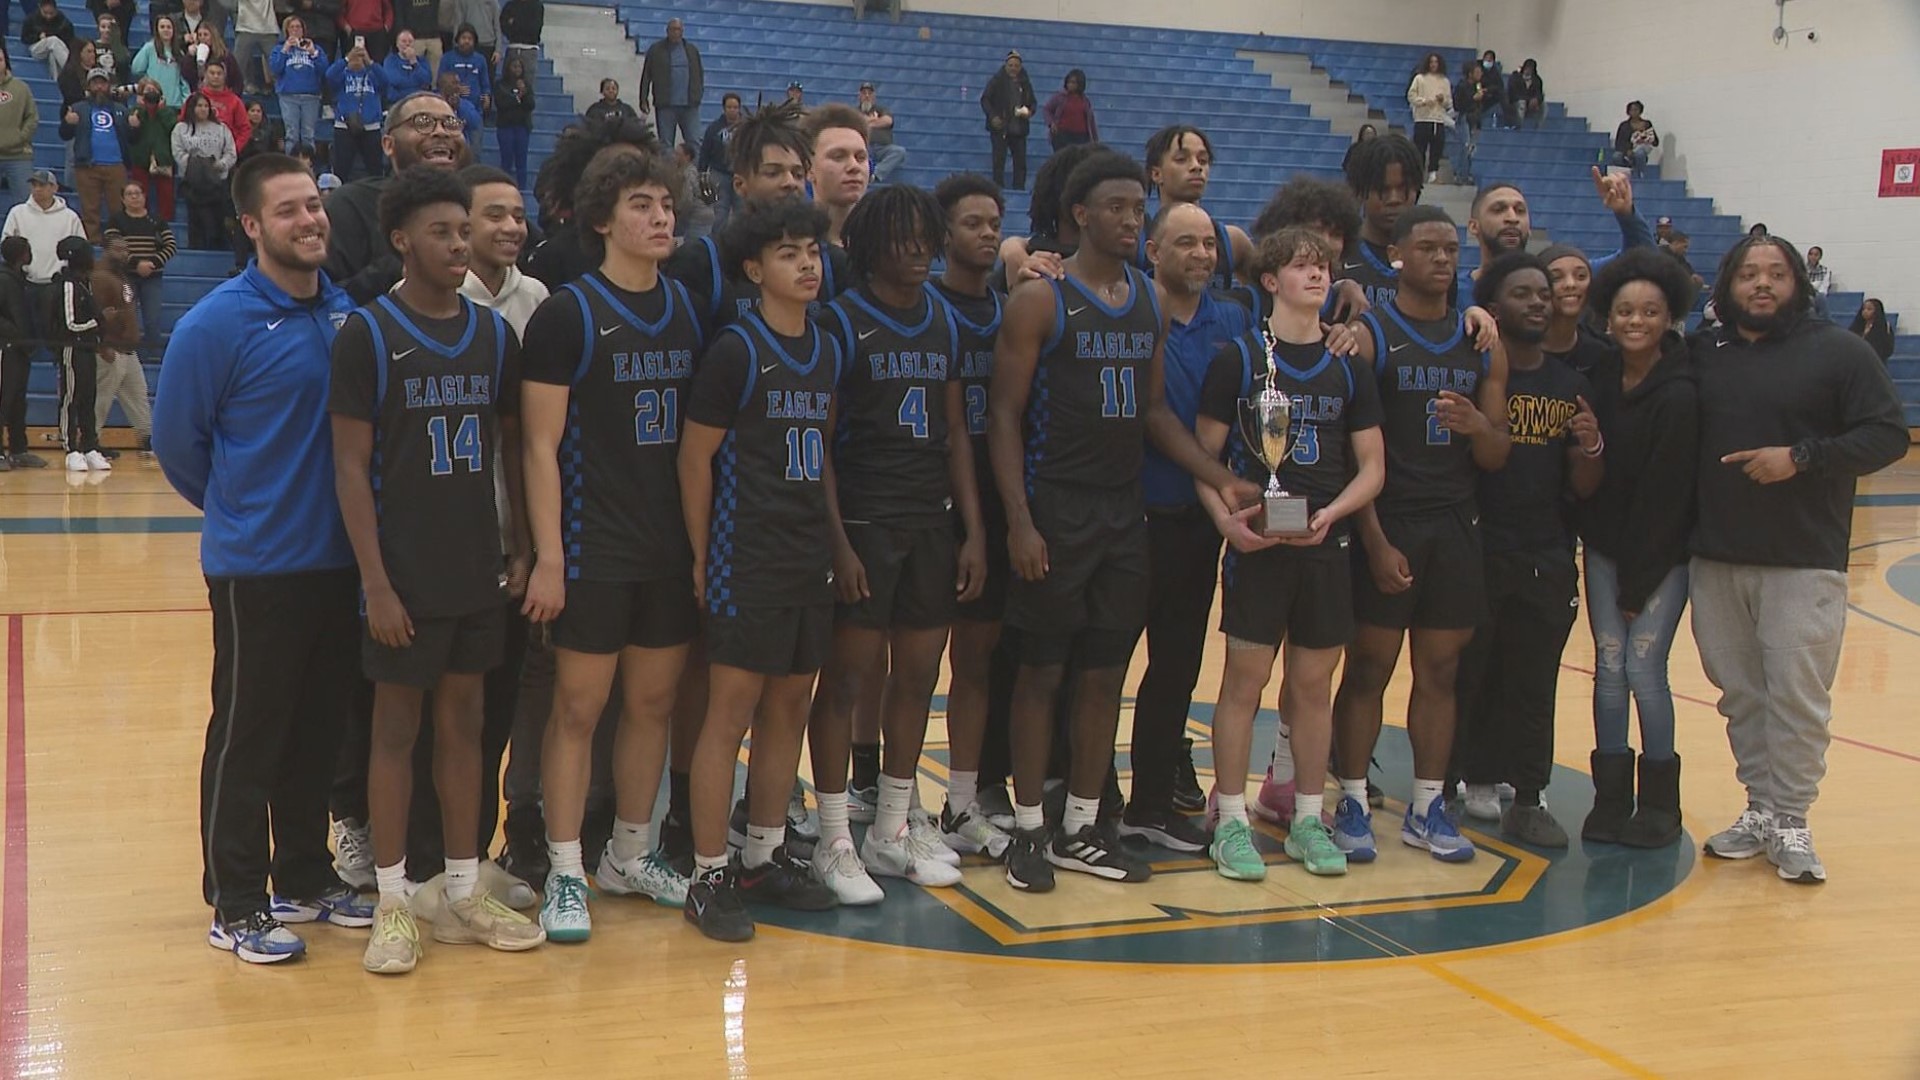 The Landstown boys squad among the first to capture a region title and move on to the state tournament.